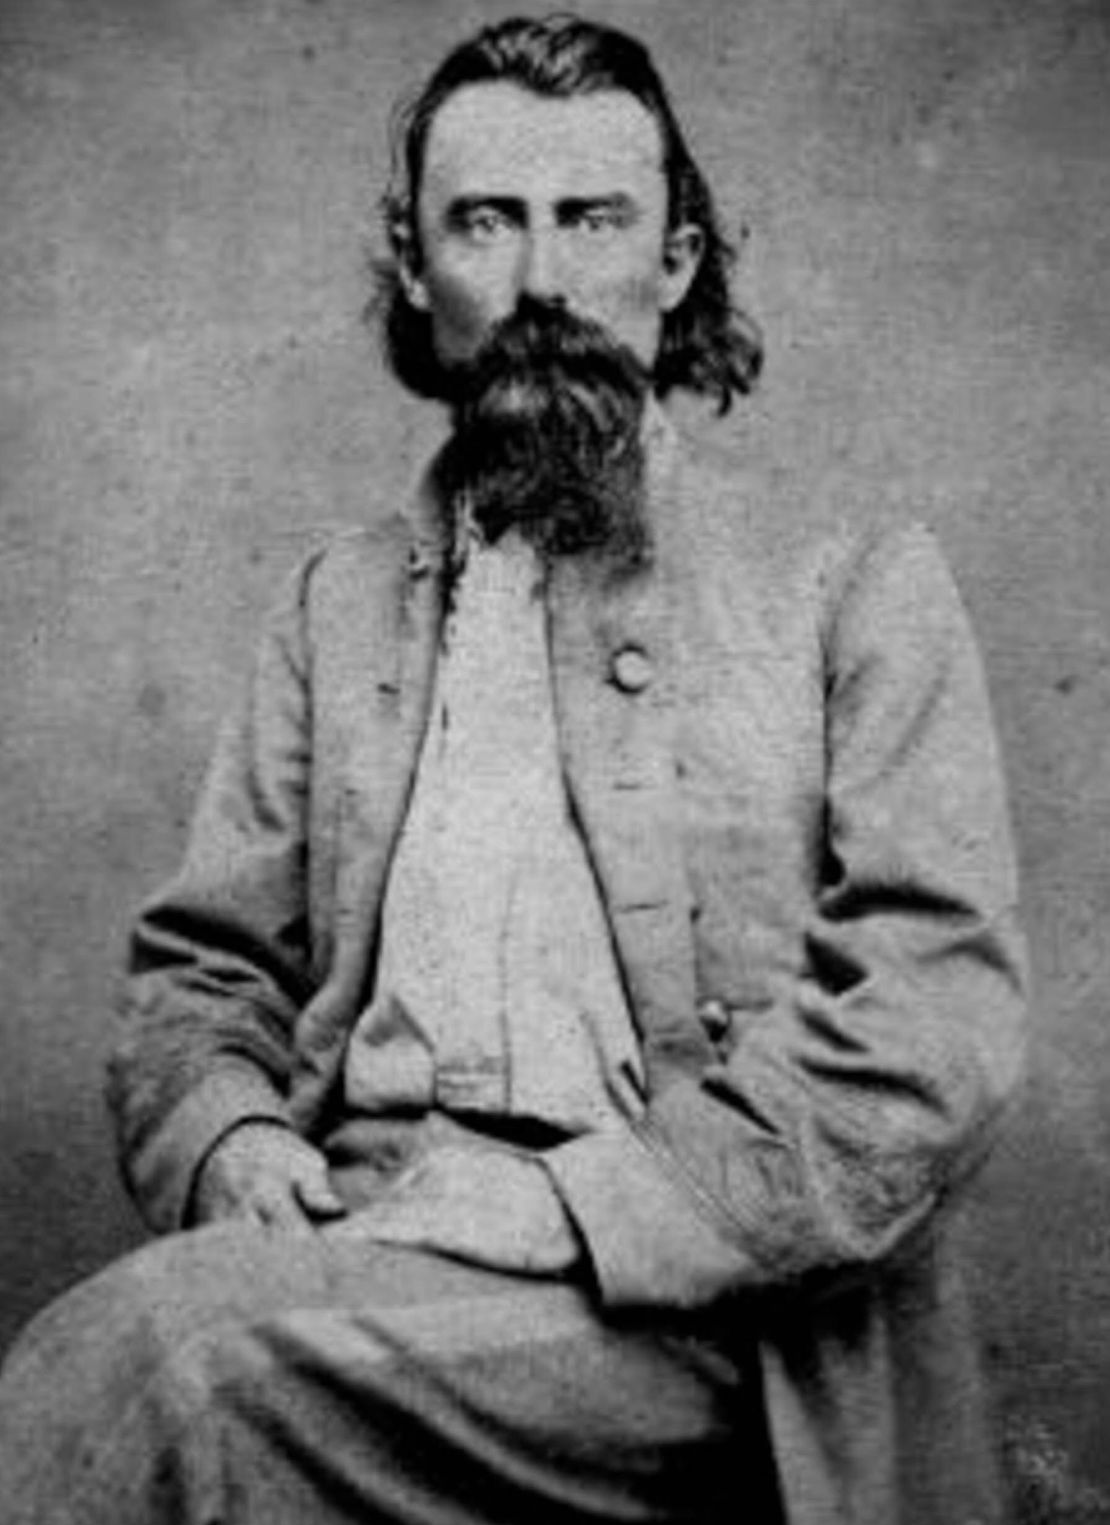 Joseph Orville Shelby was a Confederate general who famously fled to Mexico in 1865 rather than surrendering to Union forces.